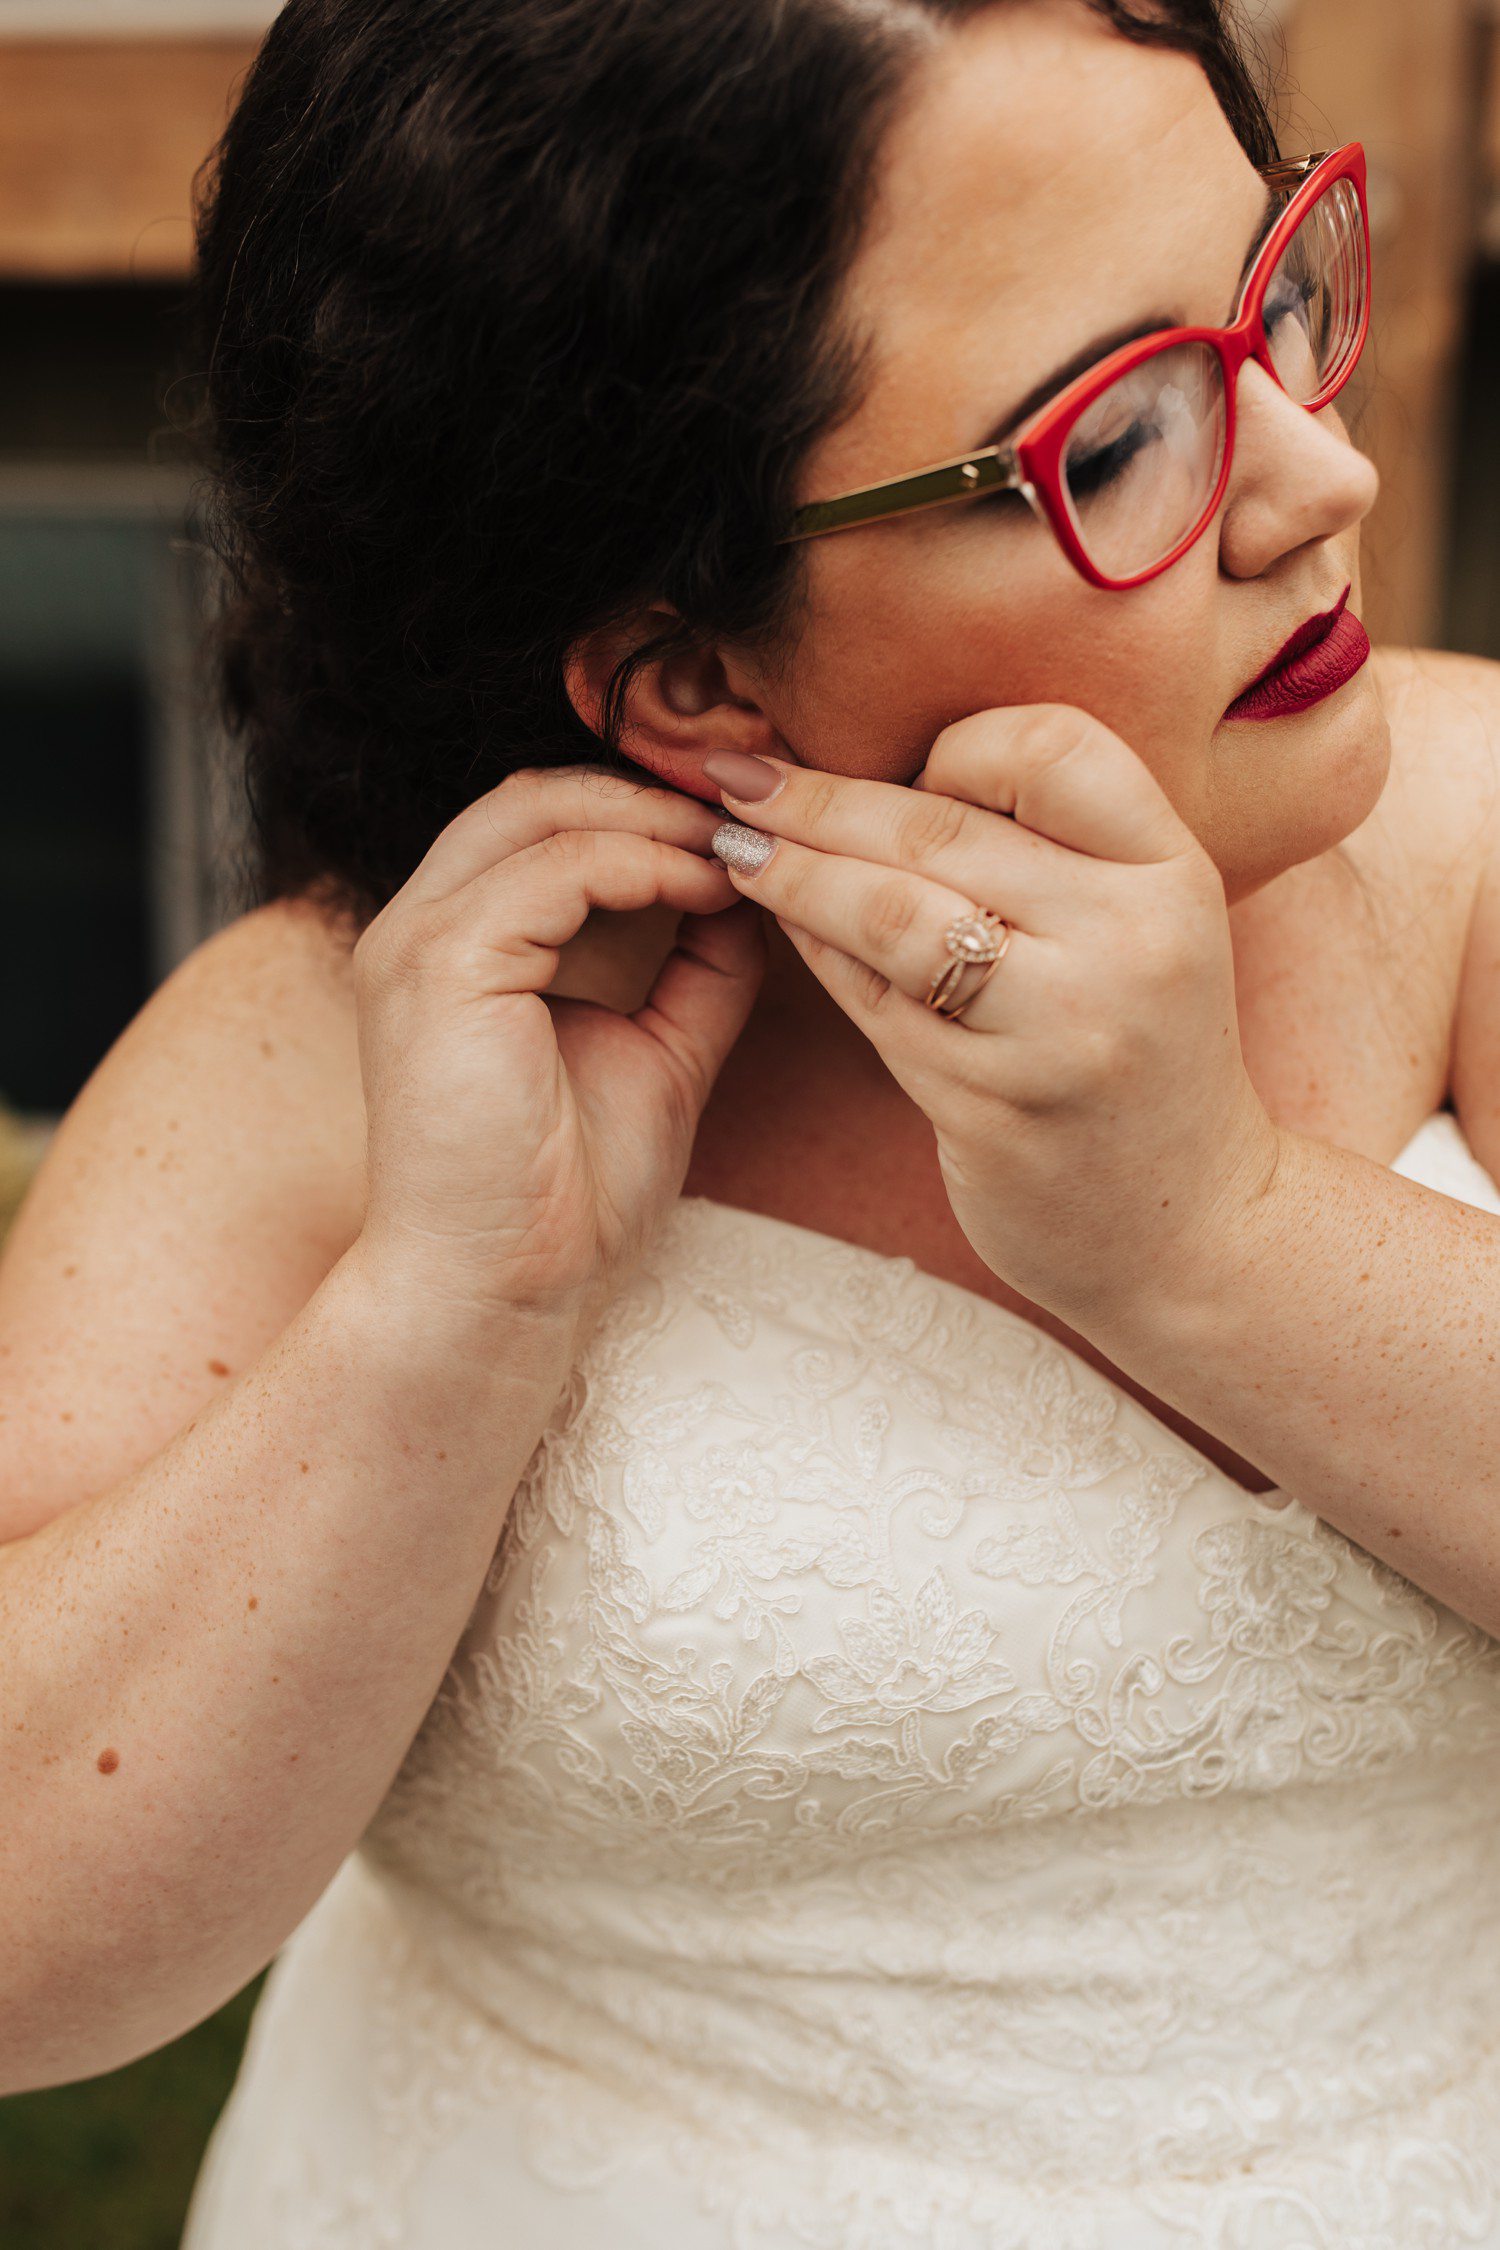 Bride with red glasses getting ready